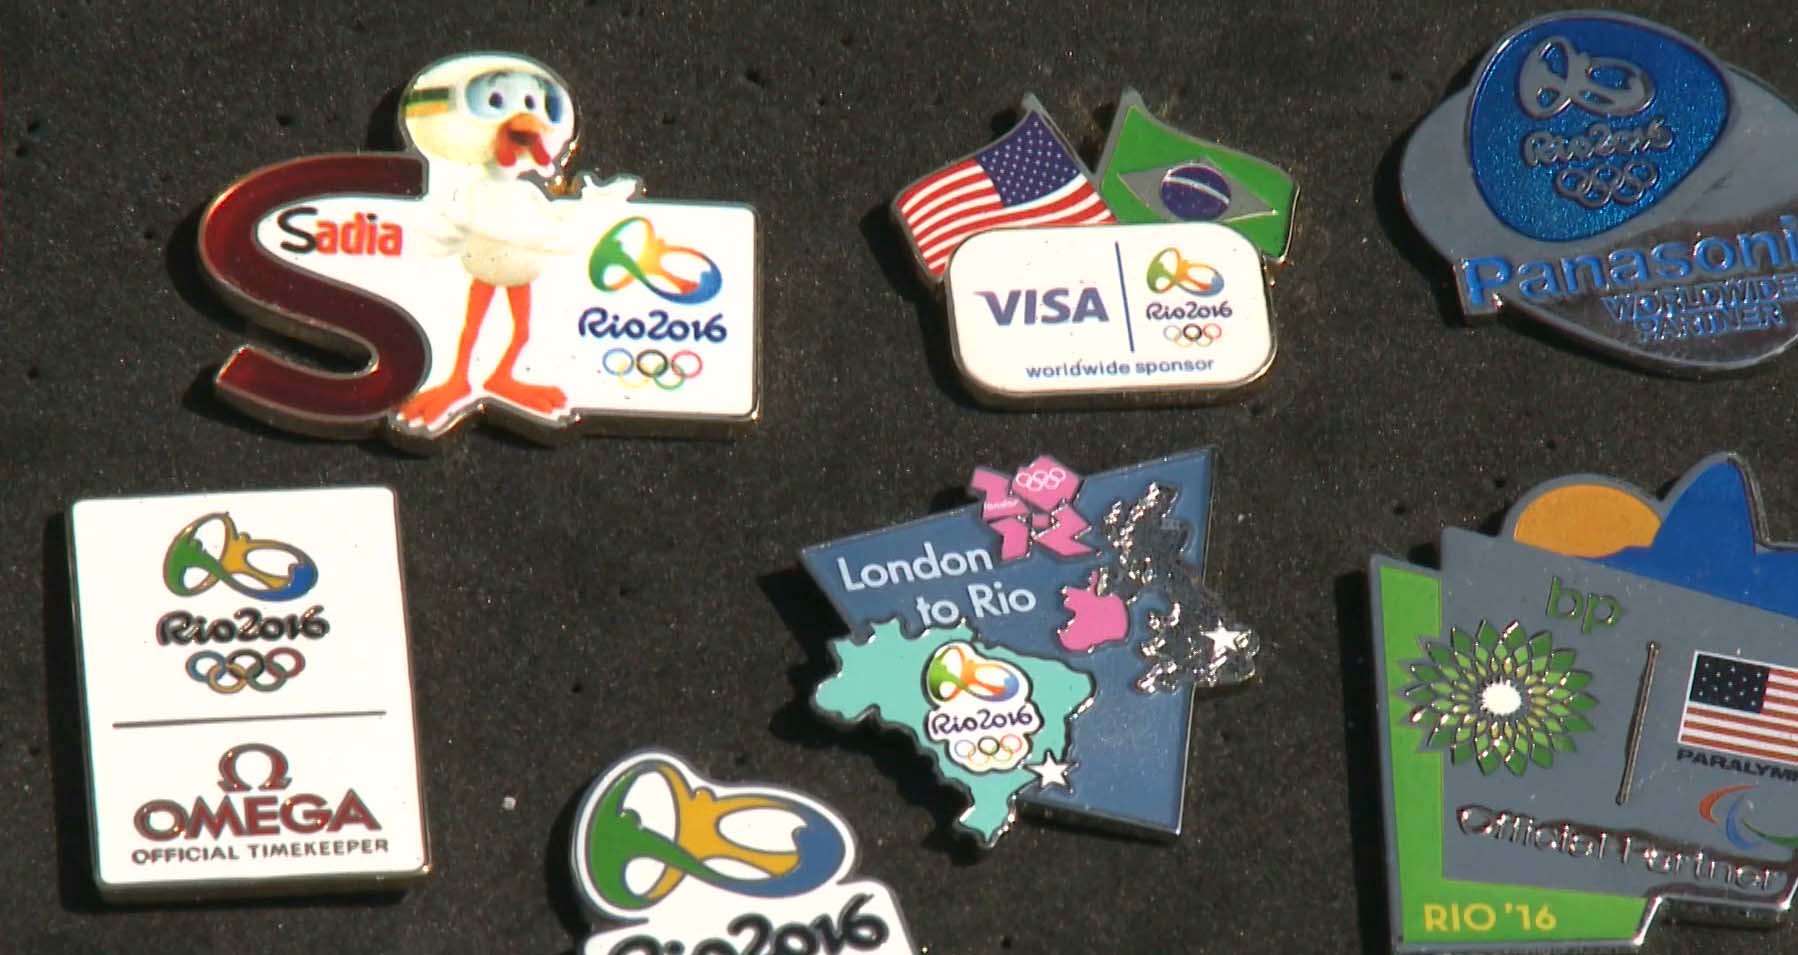 Olympic pin fever almost as exciting as actual games